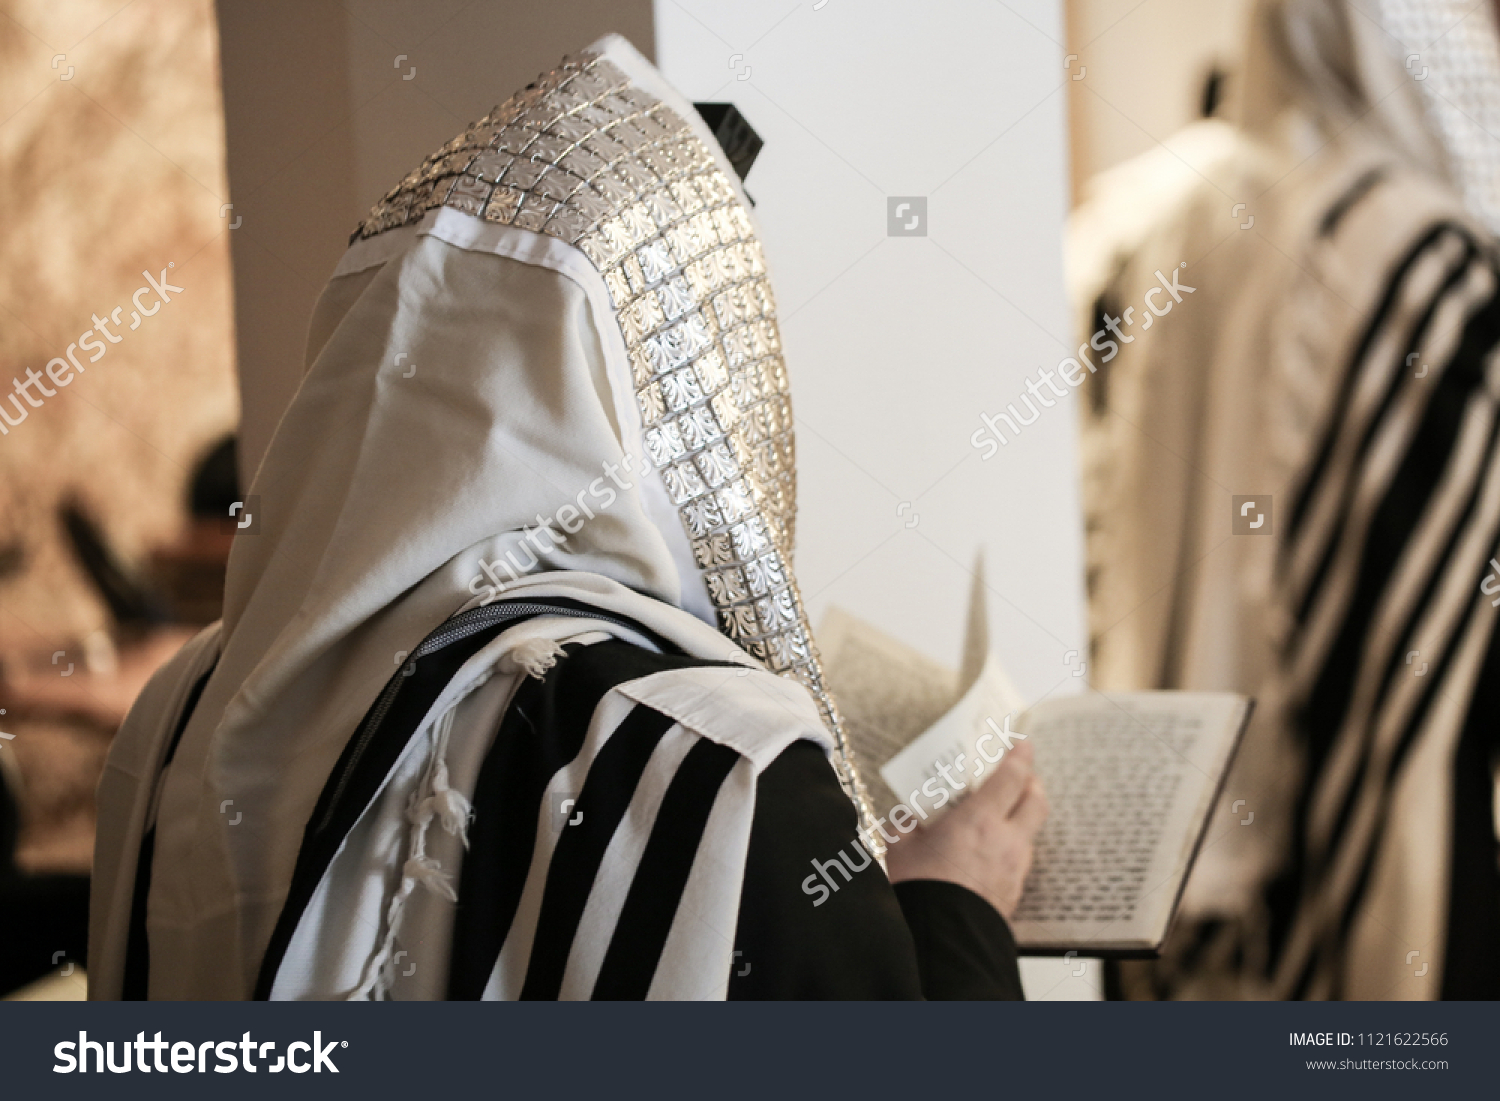 Jewish orthodox man wrapped in prayer shawl from a side view #1121622566